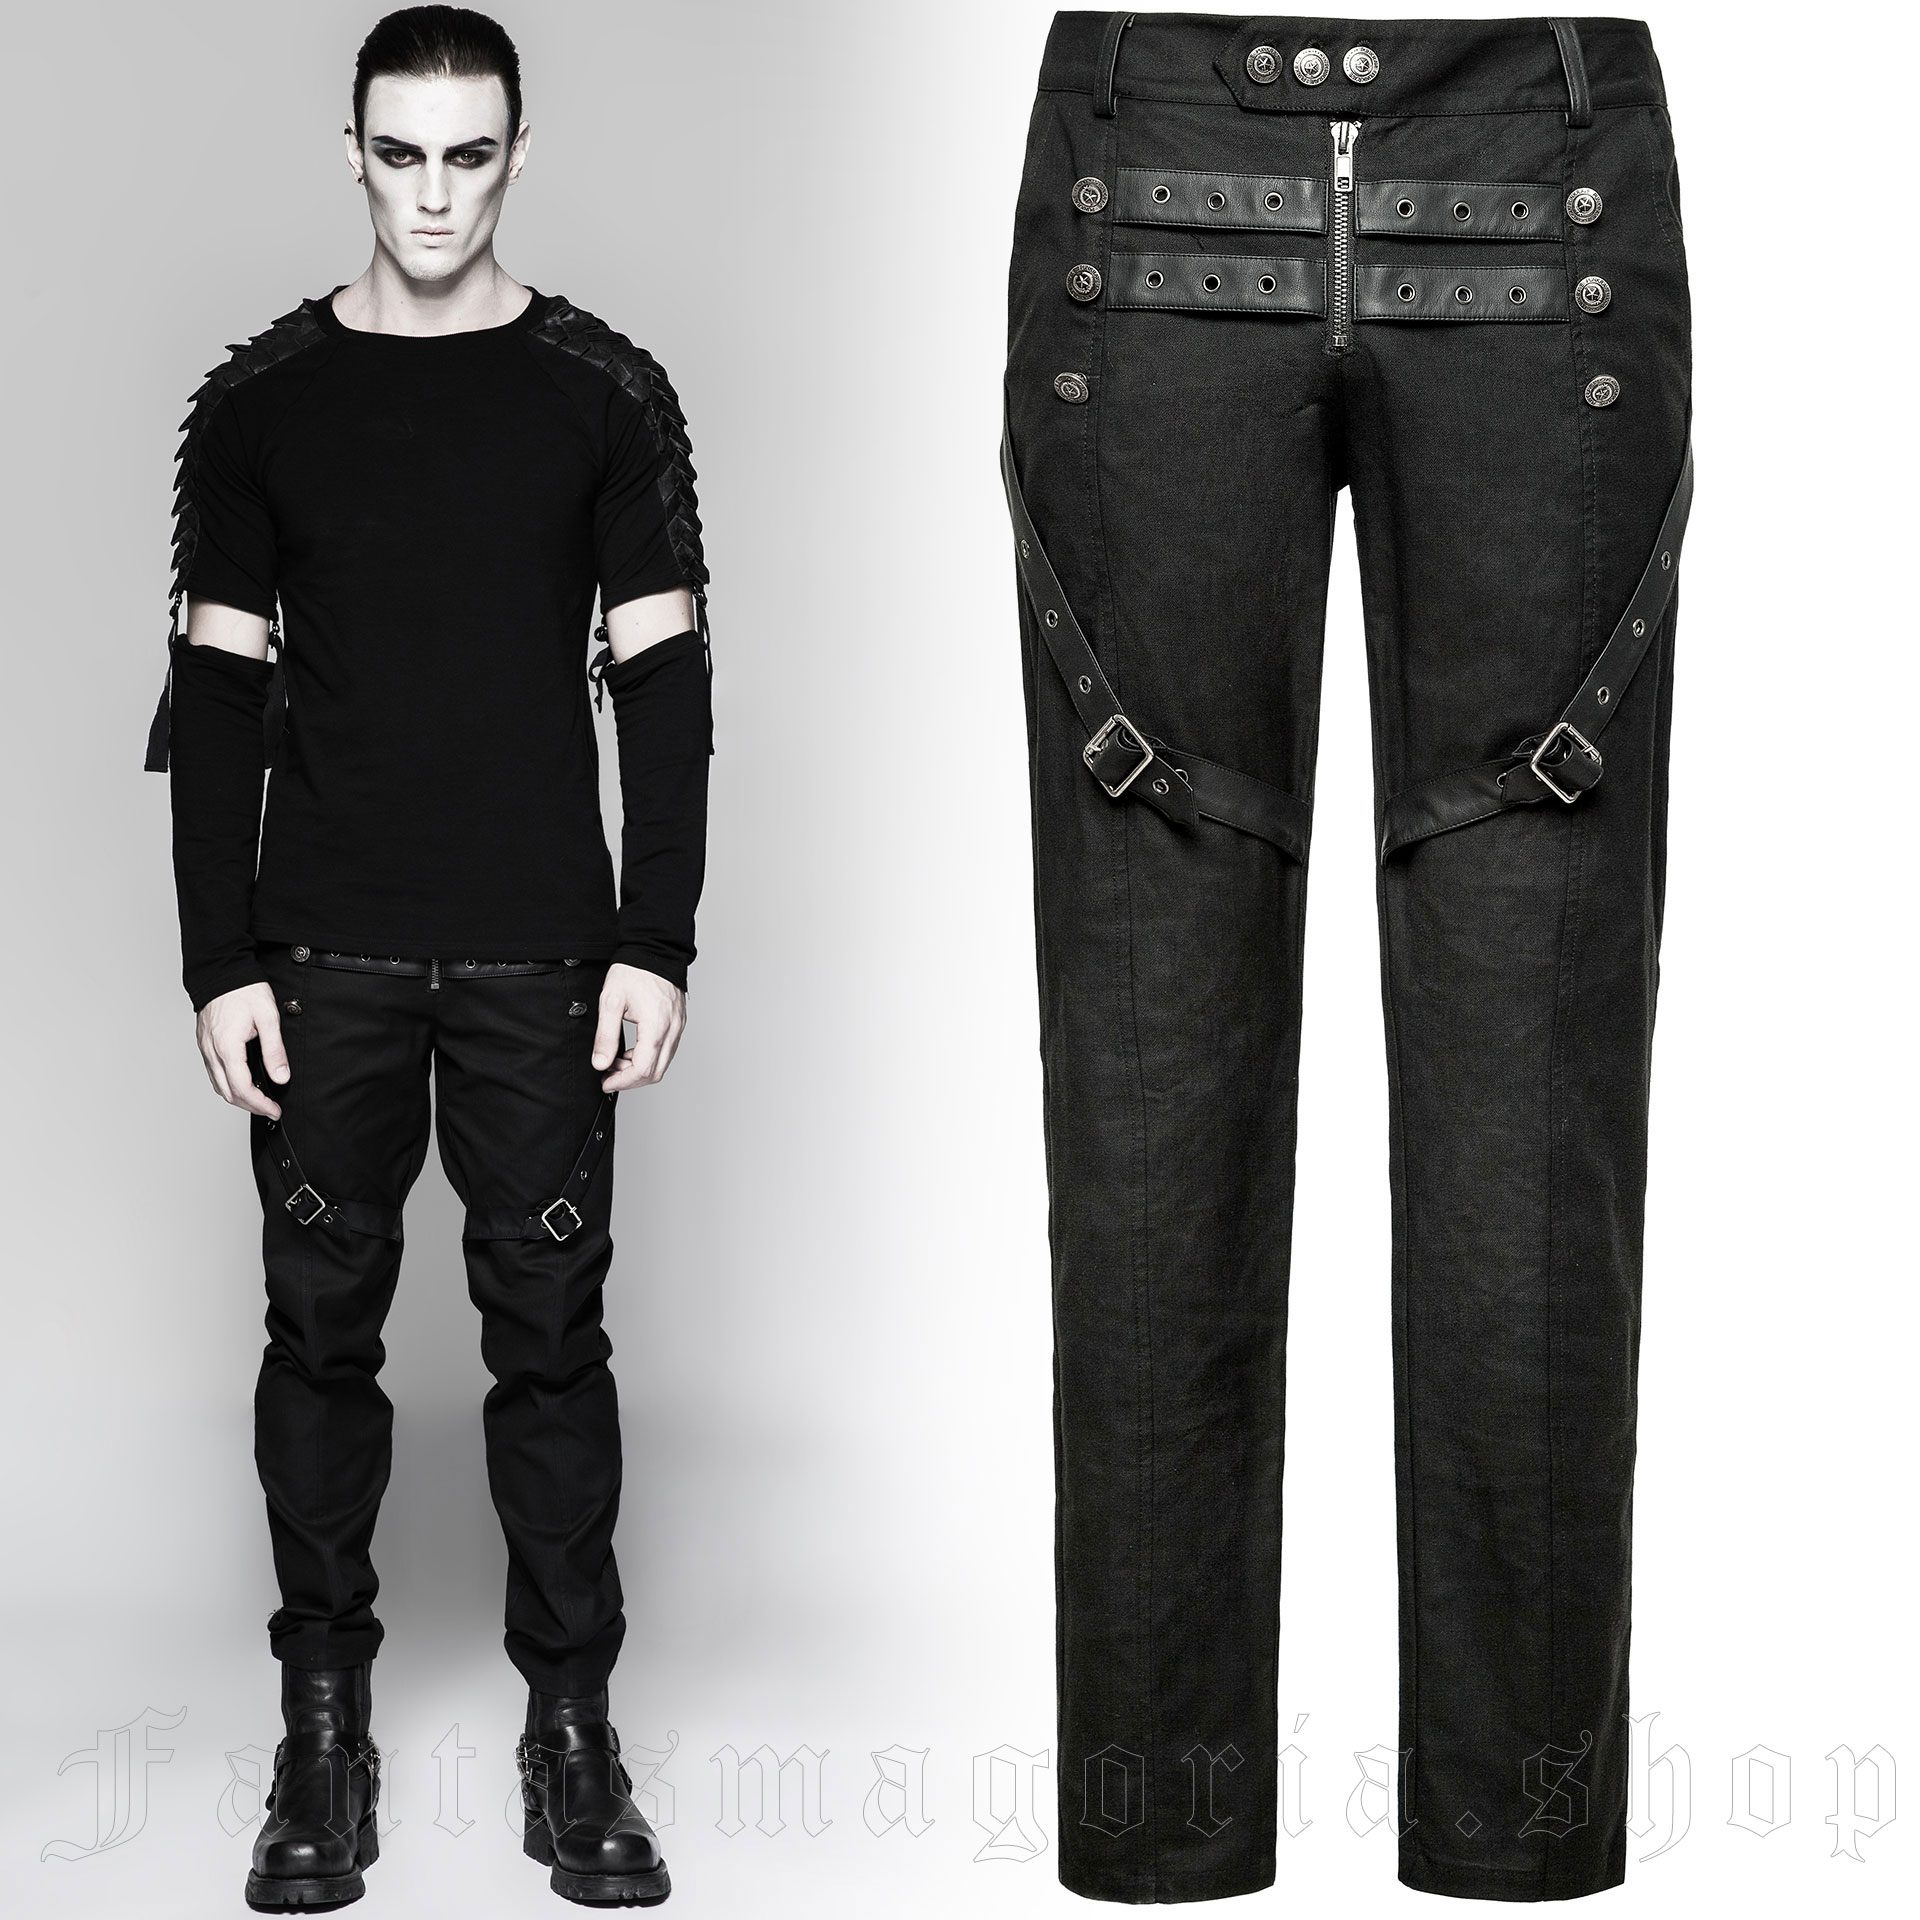 Aries Trousers Punk Rave K-279 1